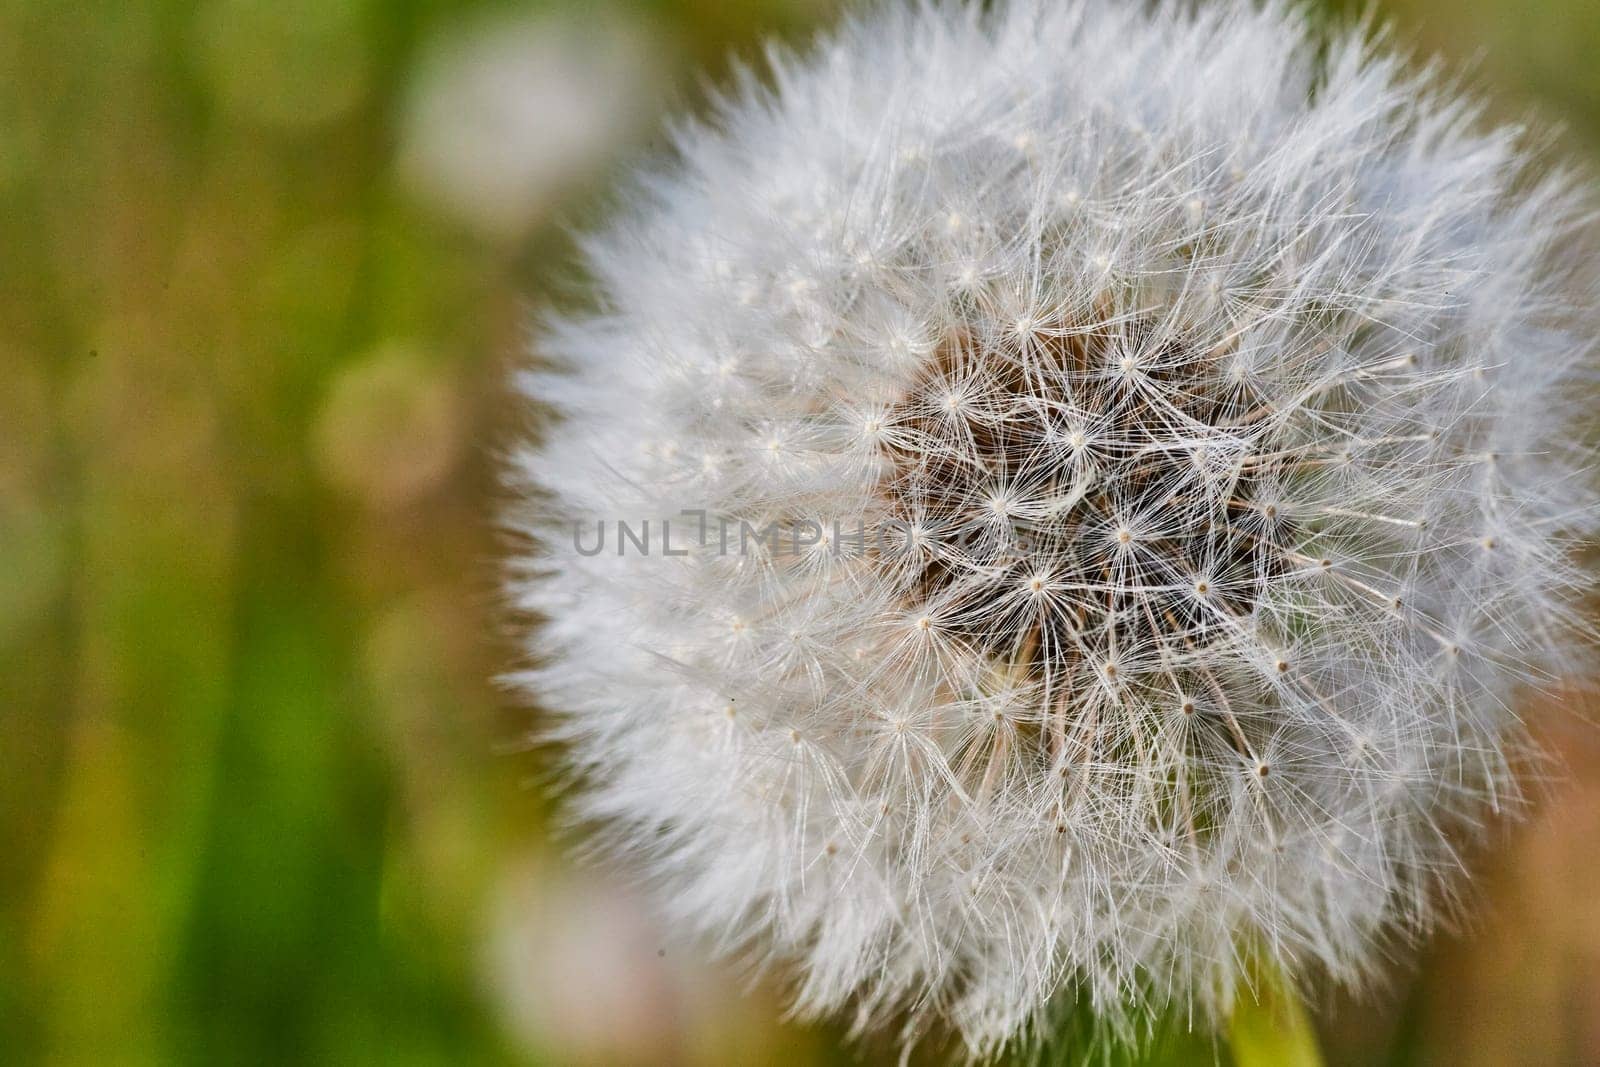 Close-up of a dandelion seed head in Fort Wayne, capturing the delicate beauty and cycle of life.